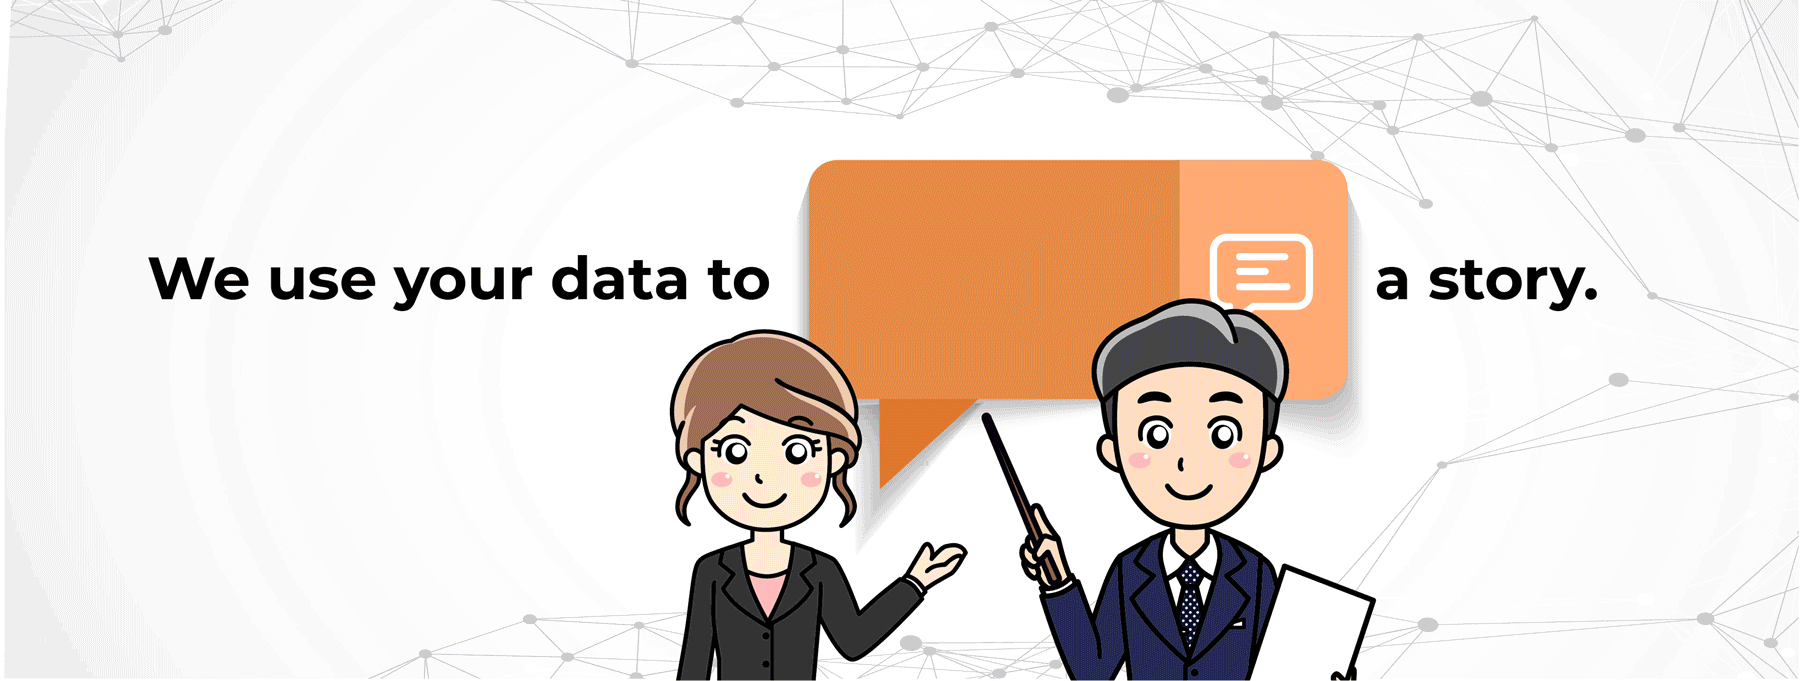 BAnner-we-use-you-data-to-